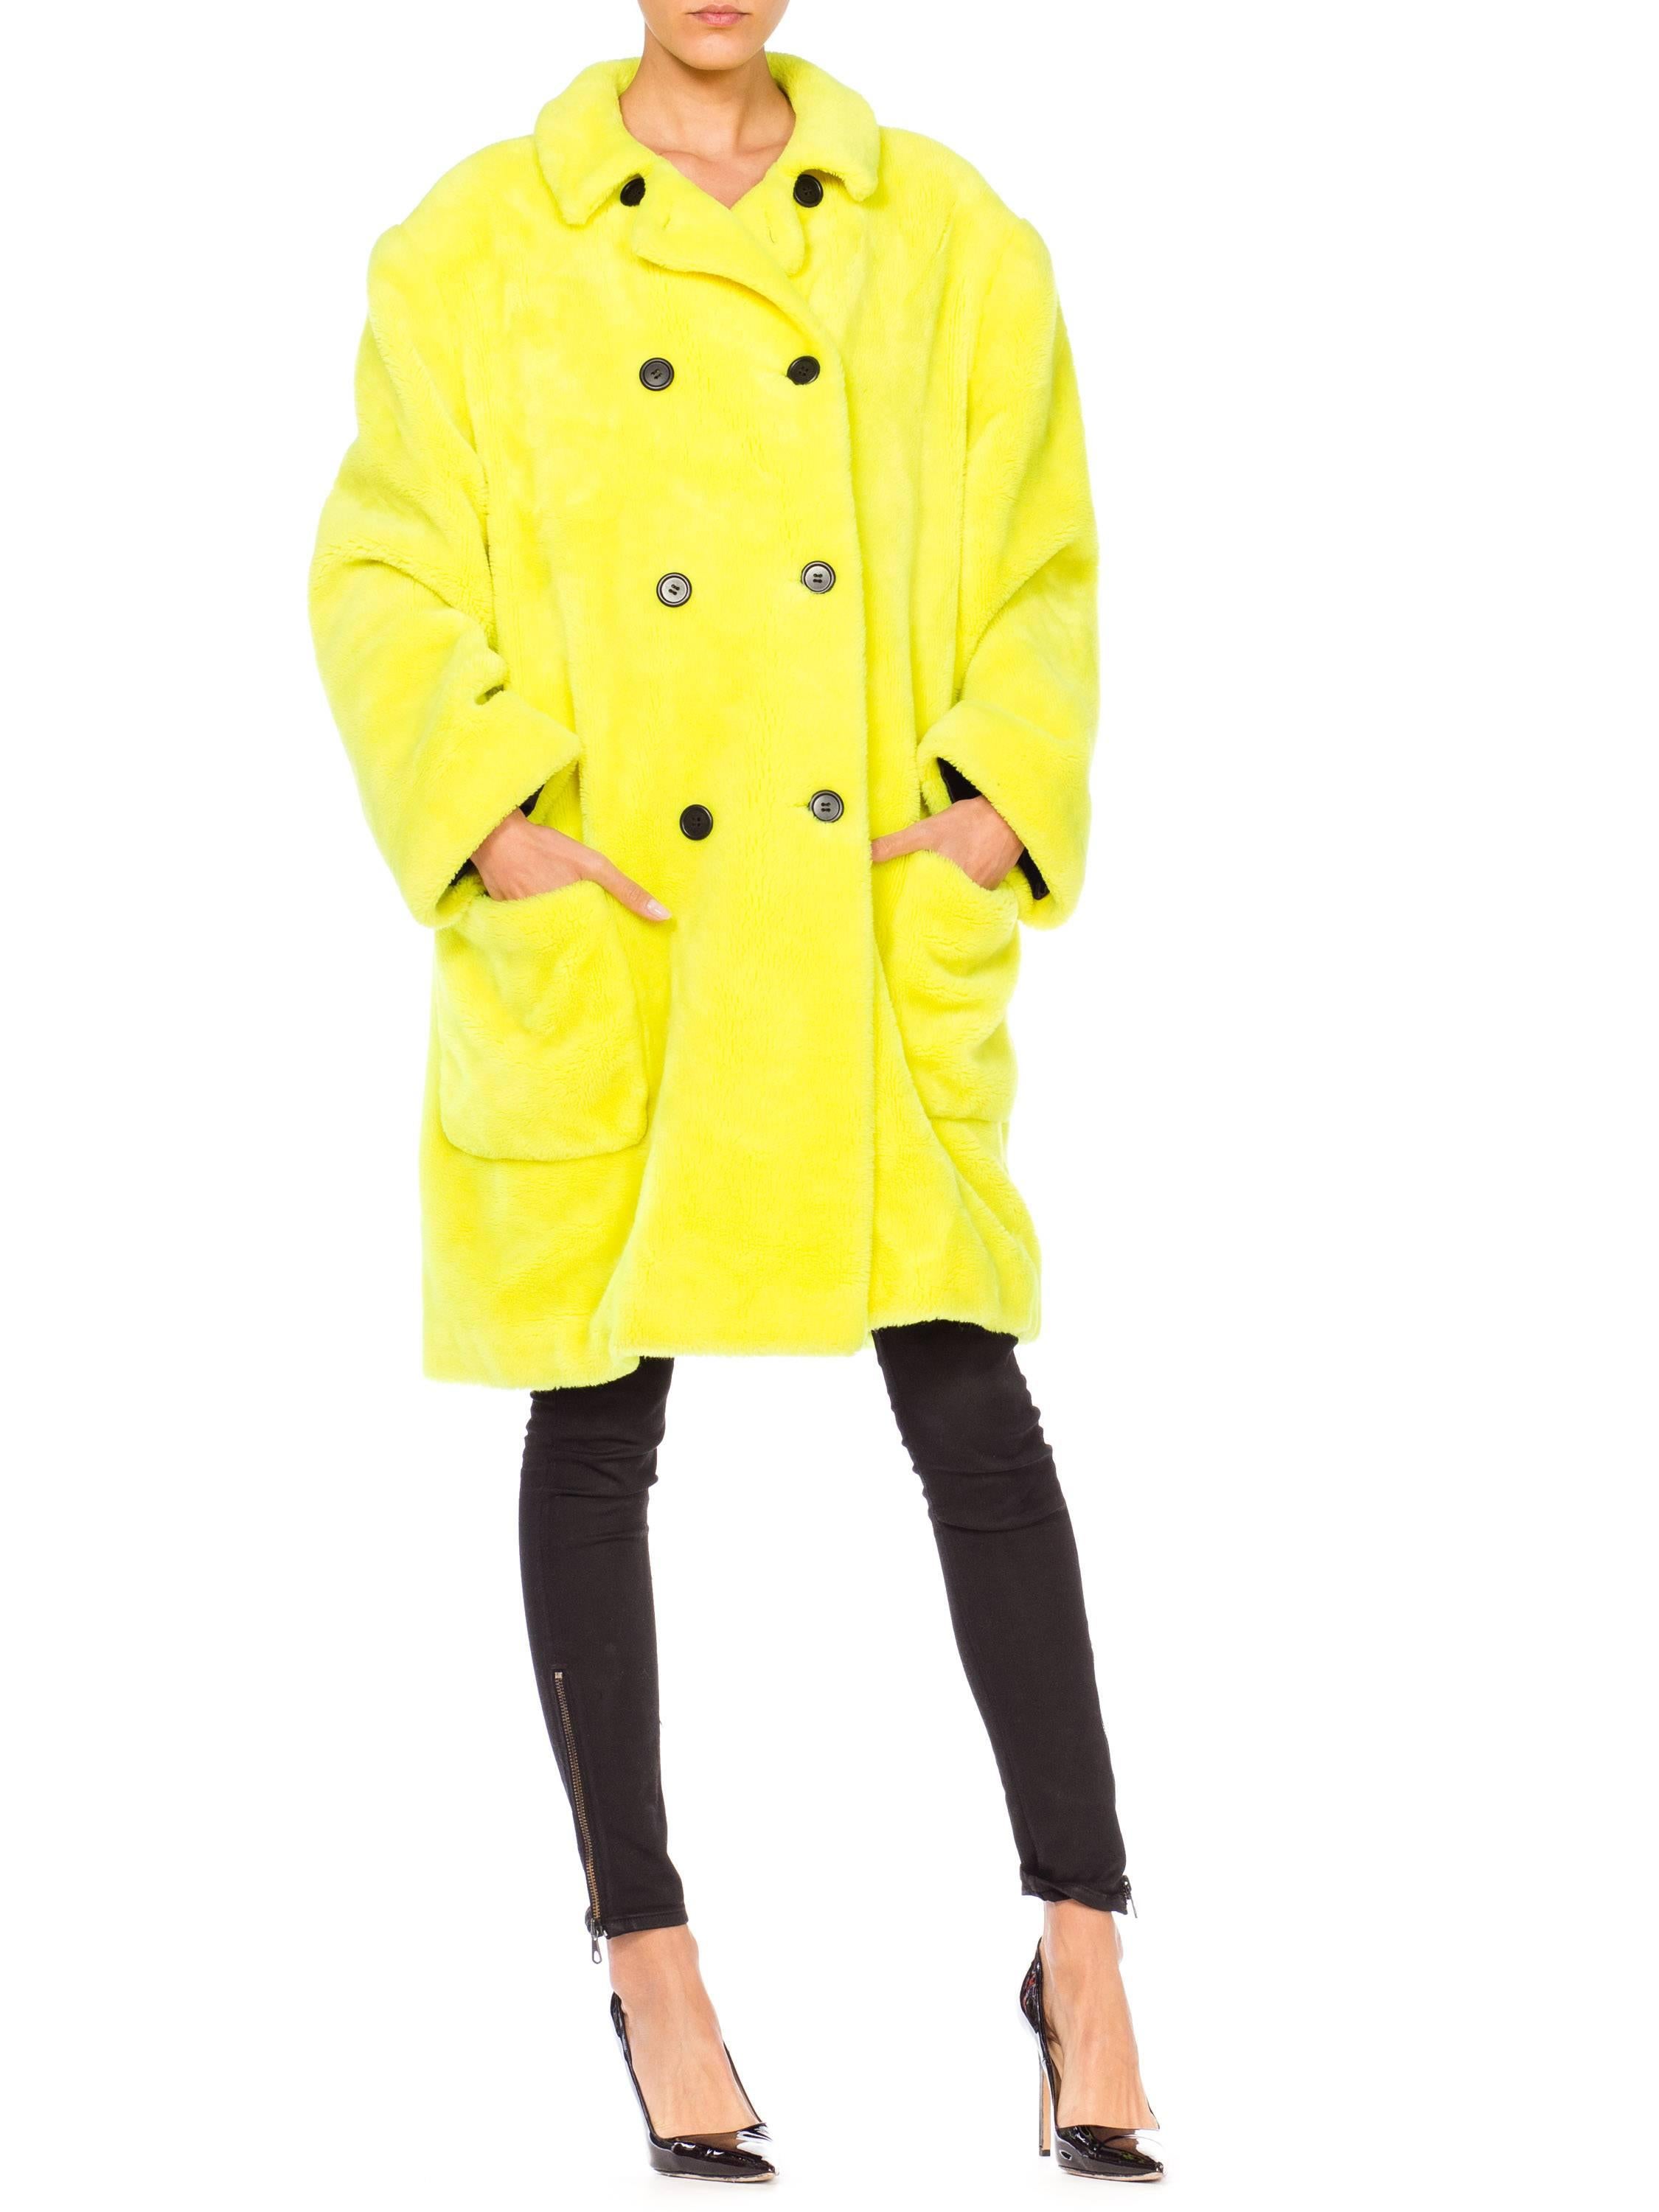 Women's or Men's Stephen Sprouse Oversized Highlighter Yellow Faux Fur Coat, 1980s 